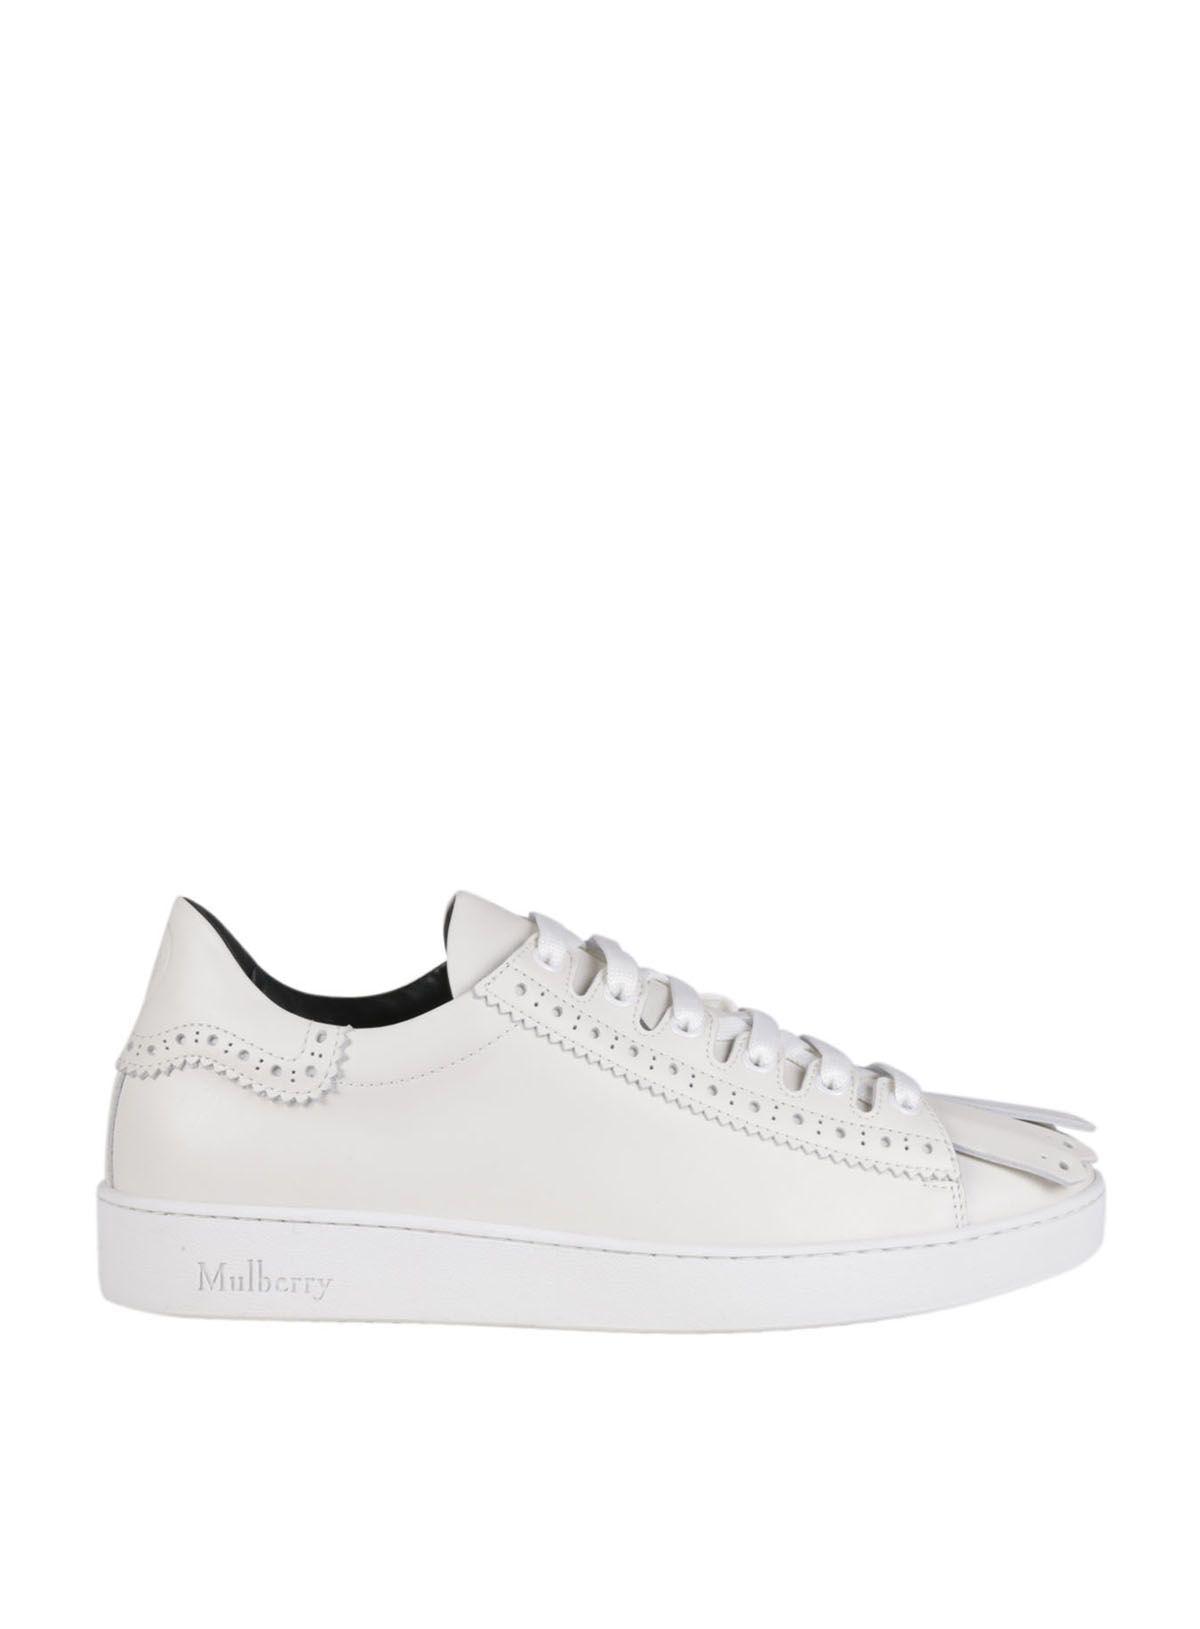 Mulberry Brogue Detailing Sneakers In White | ModeSens